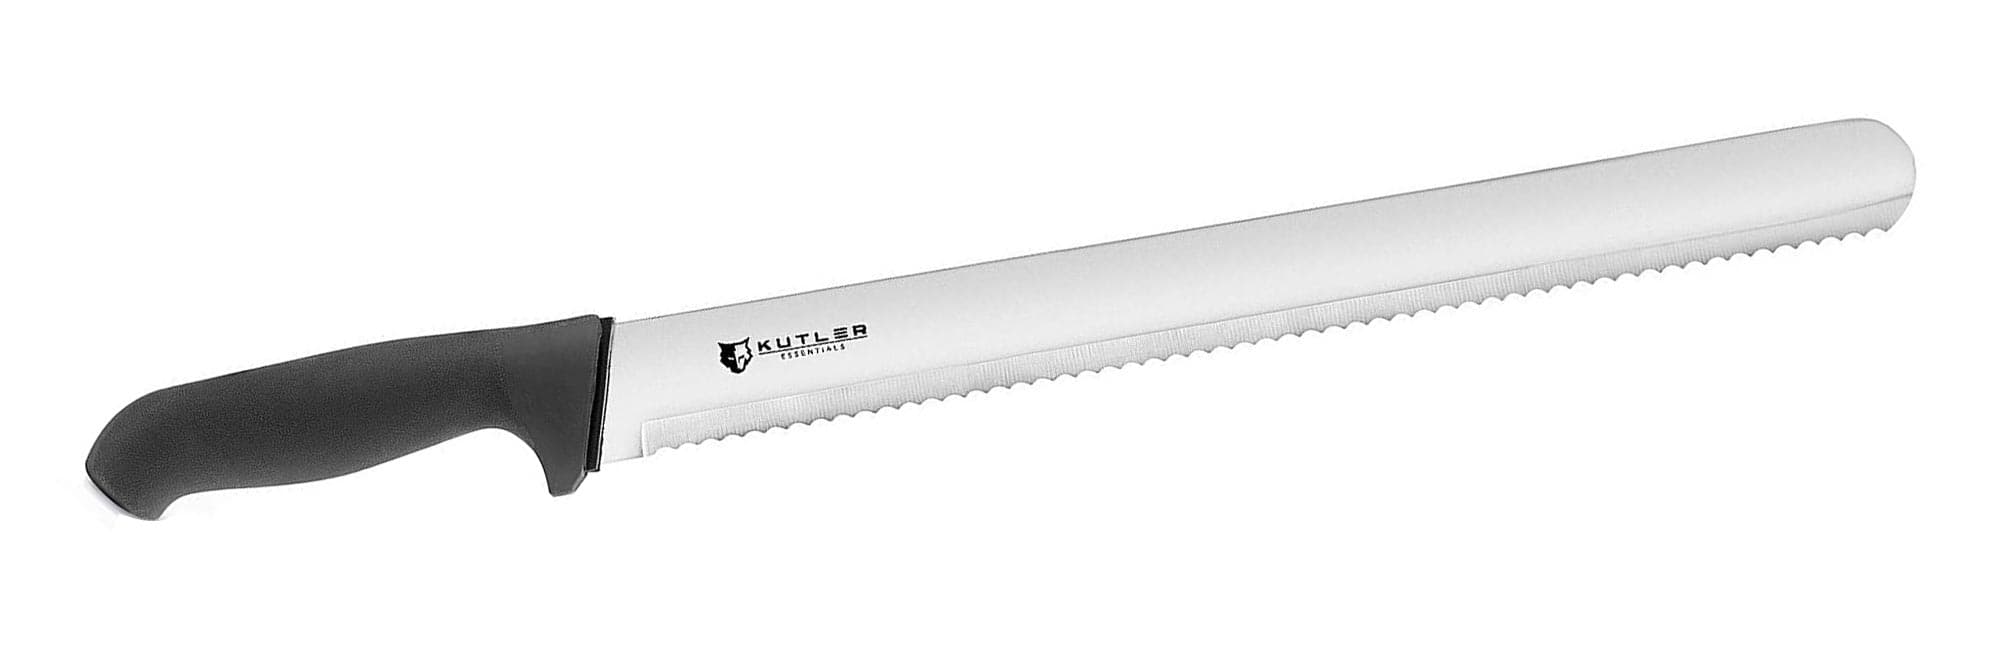 KUTLER Professional 14-Inch Bread Knife and Cake Slicer with Serrated Edge - Ultra-Sharp Stainless Steel Cutlery